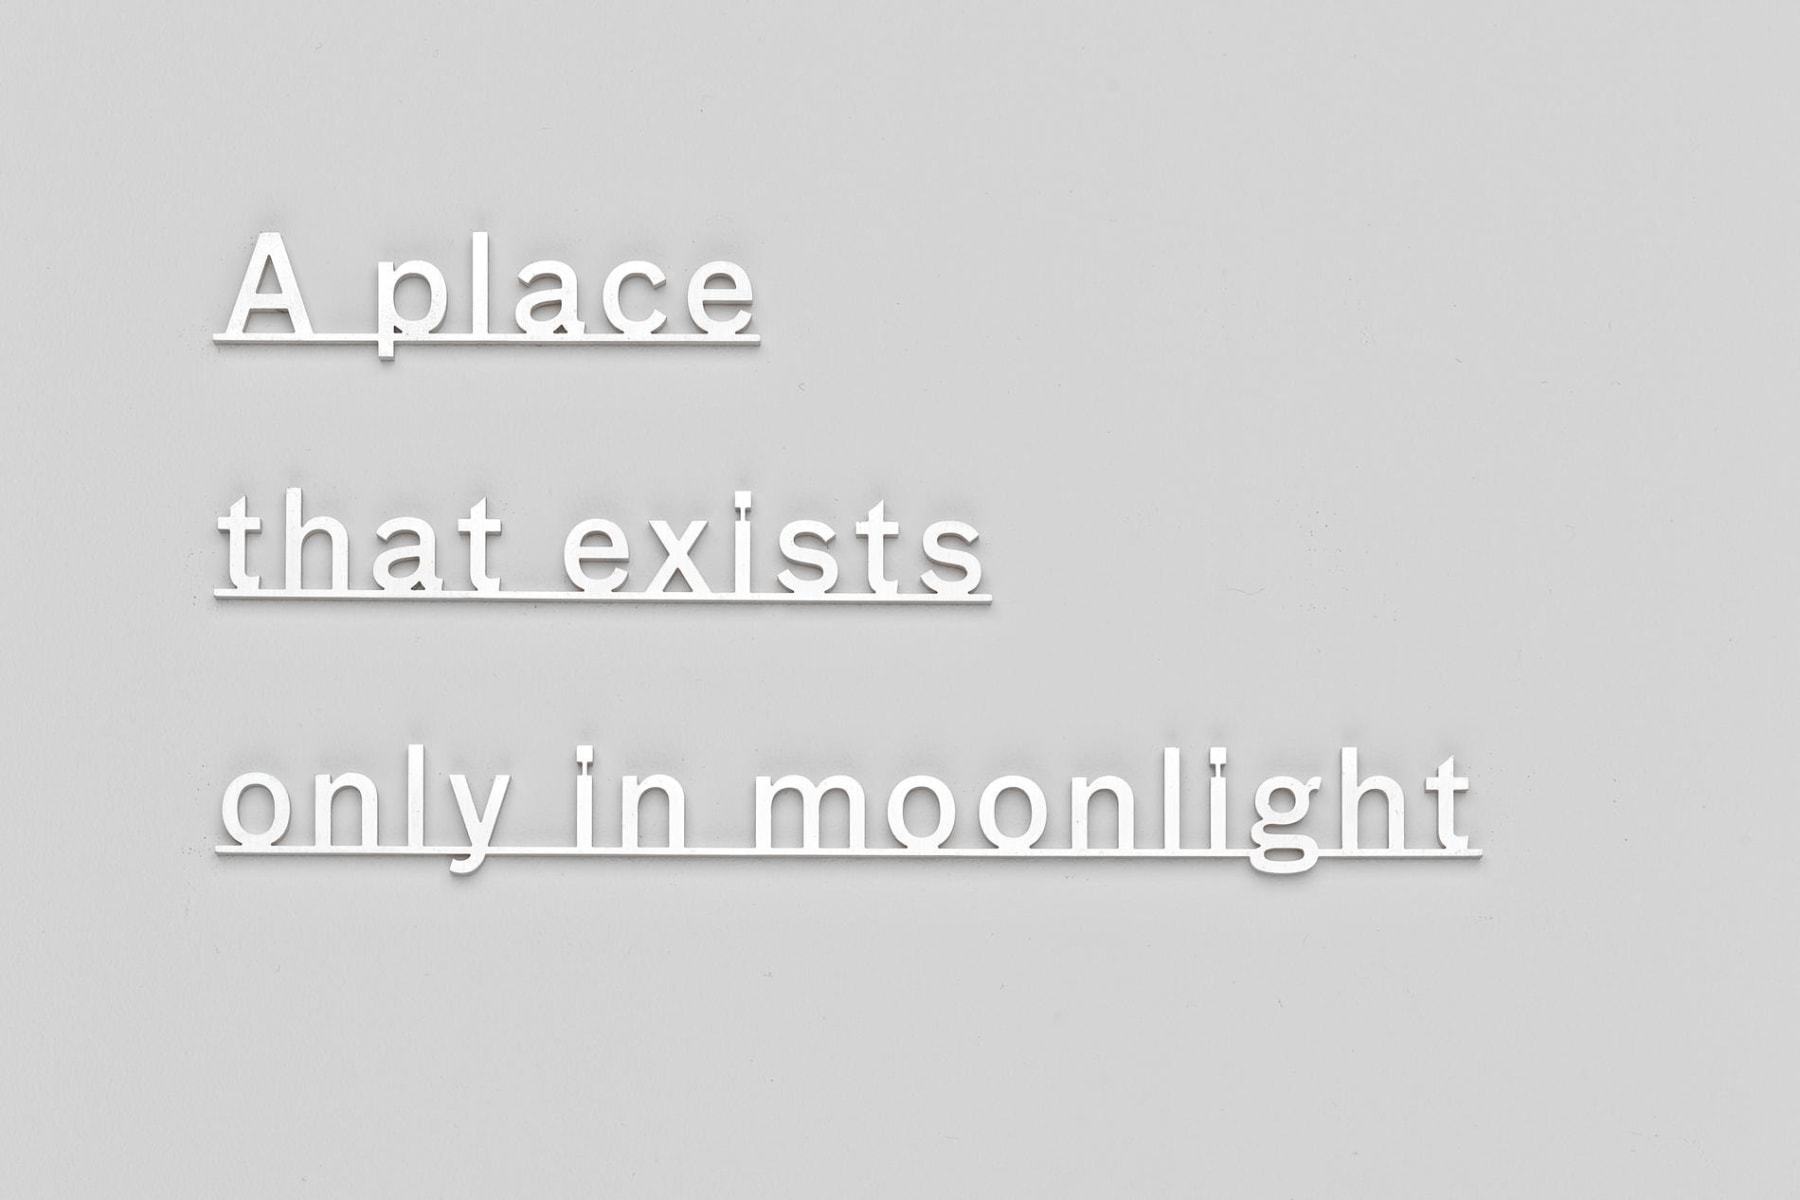 Image of KATIE PATERSON's A place that exists only in moonlight, 2015